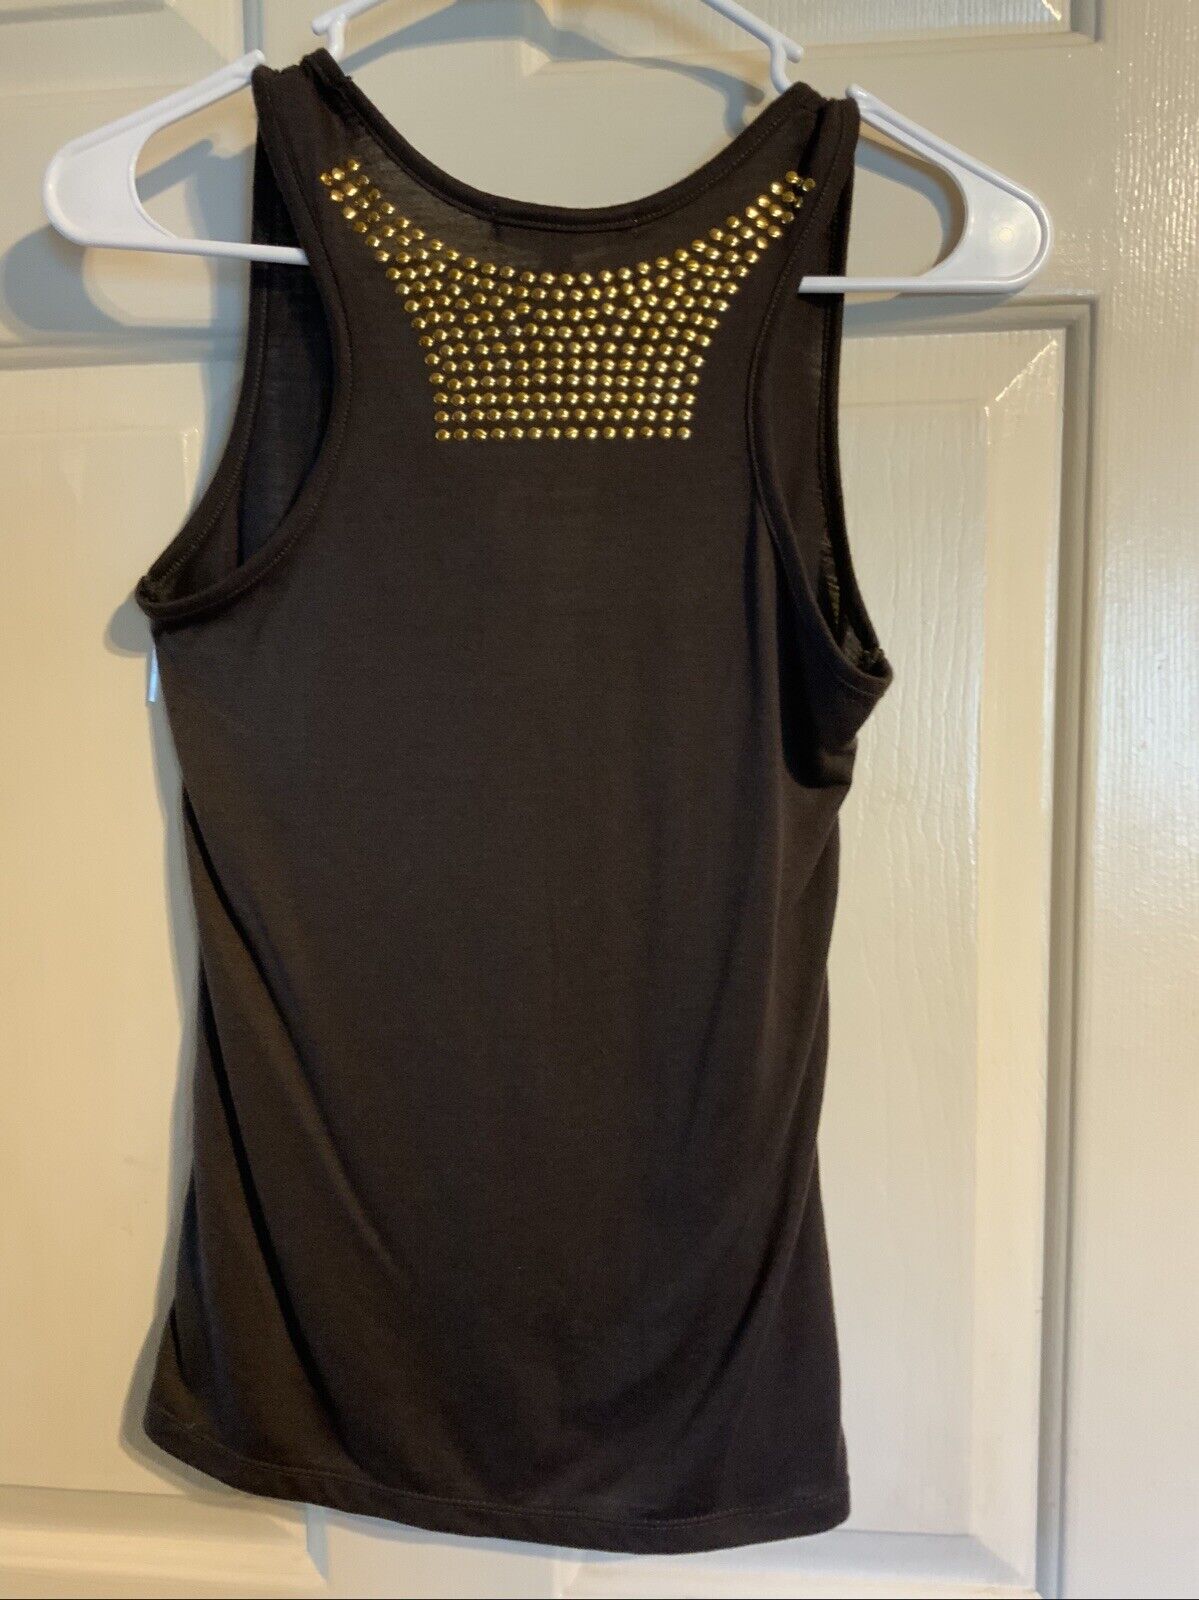 NWT Rock Revolution Dress Tank Top Women’s Brown With Gold Studded Sleeveless